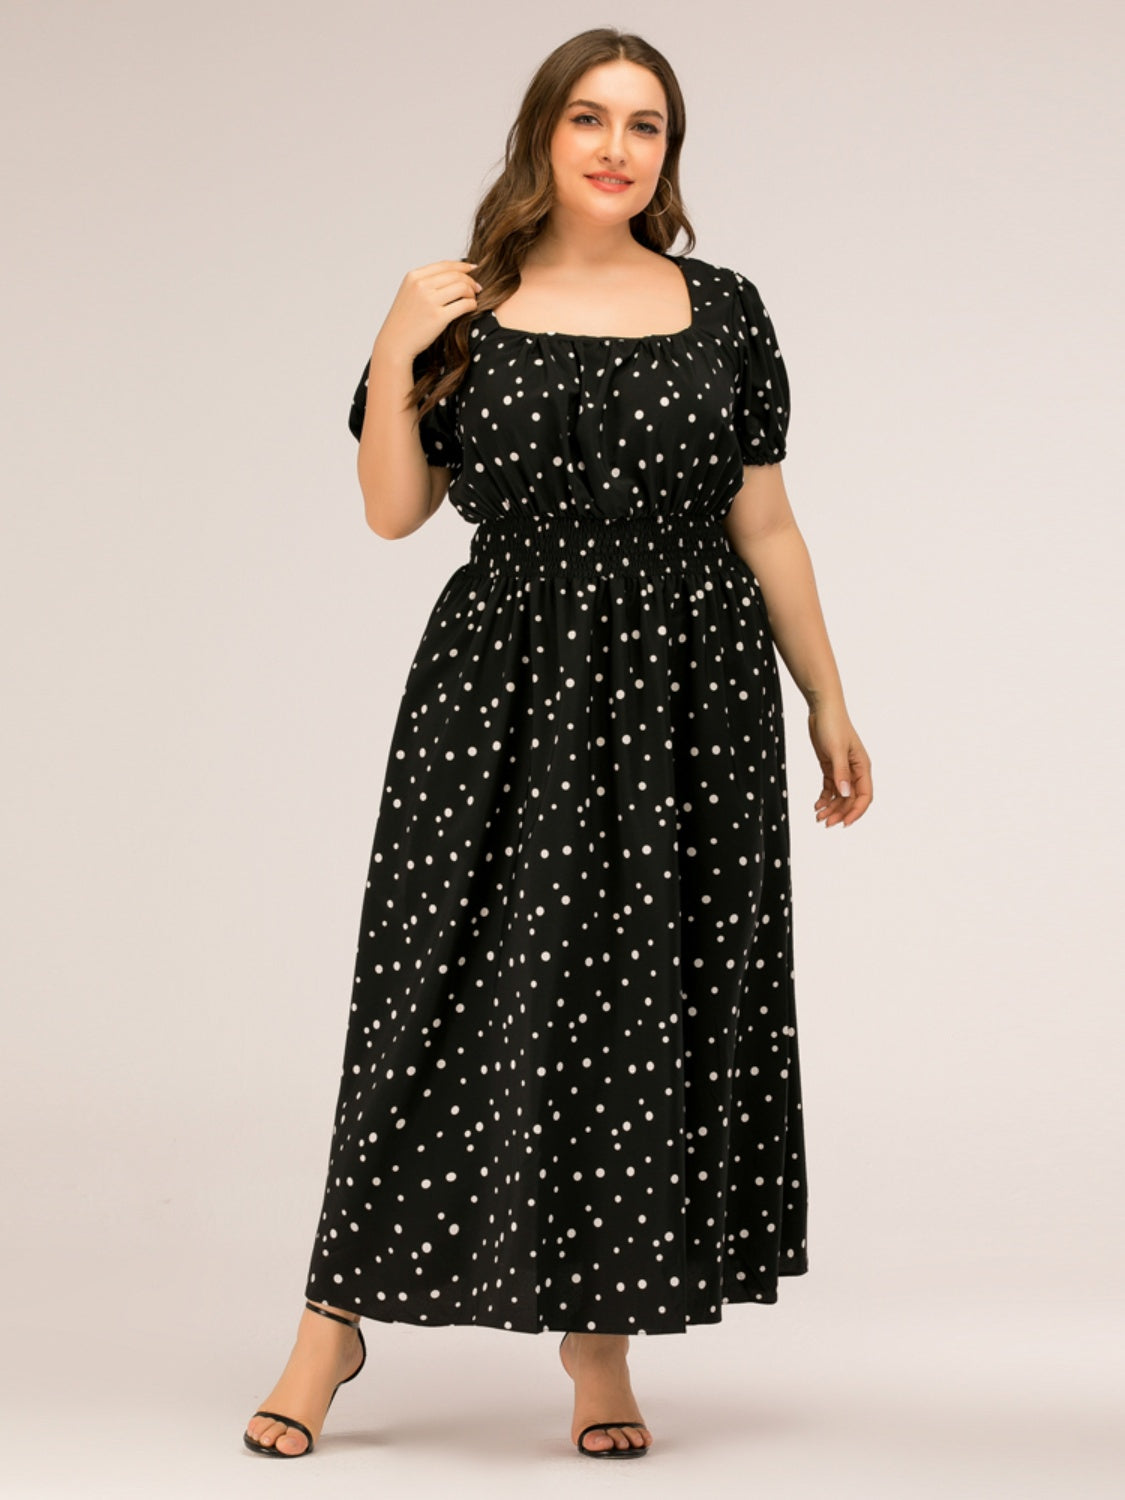 Plus Size Polka Dot Square Neck Dress for Women Over 50 | Ideal Summer Beach Wedding Guest Party Attire